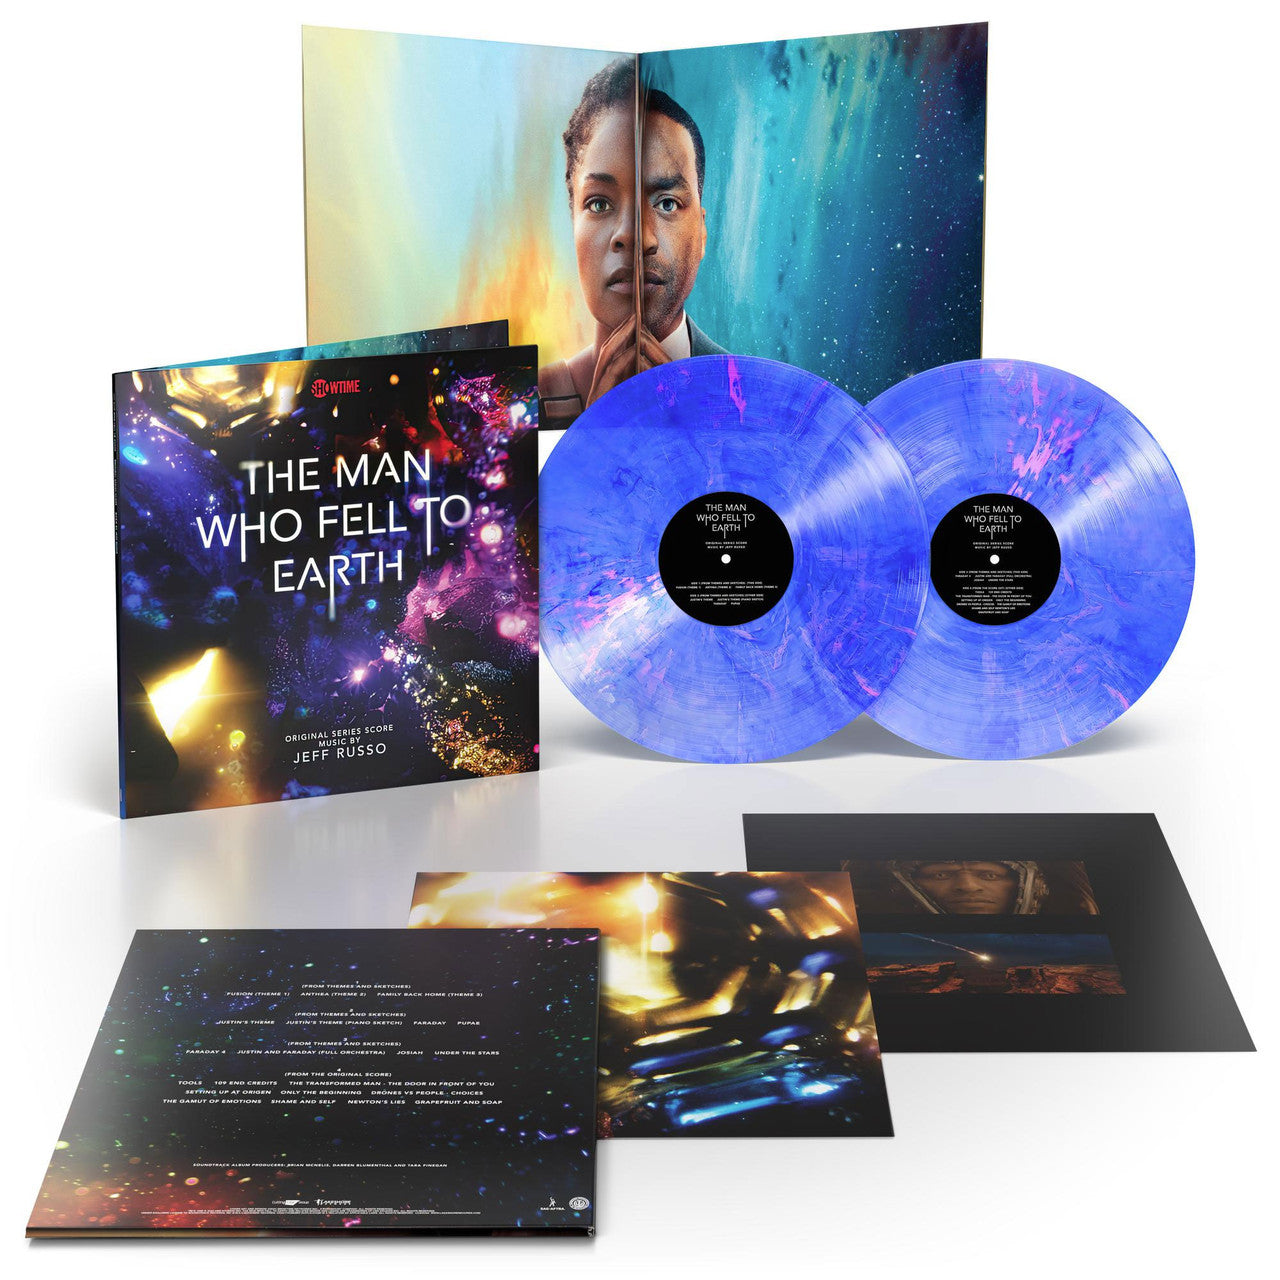 Jeff Russo - The Man Who Fell To Earth (Original Series Score) [Pink & Blue Vinyl]